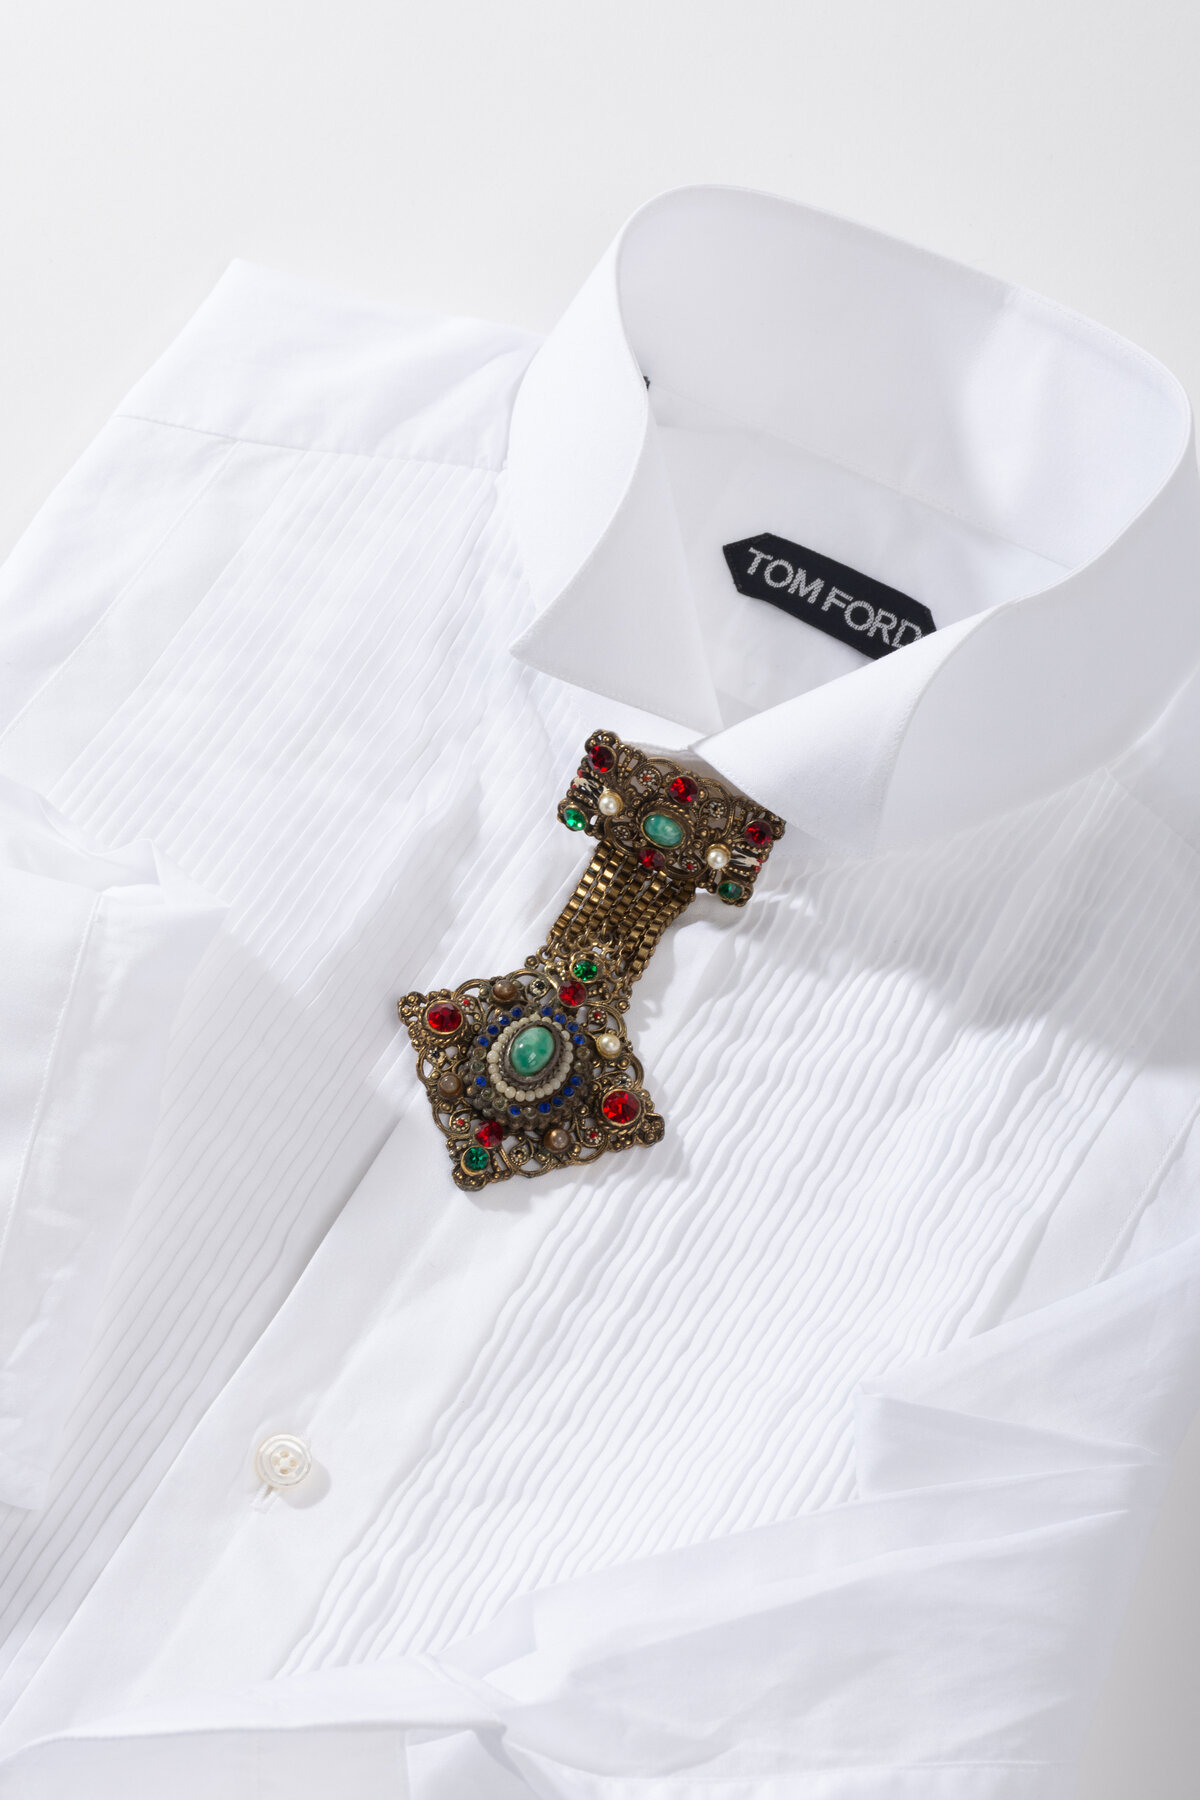 BAGAHOLICBOY SHOPS: 5 Designer Brooches To Complete Your Look - BAGAHOLICBOY